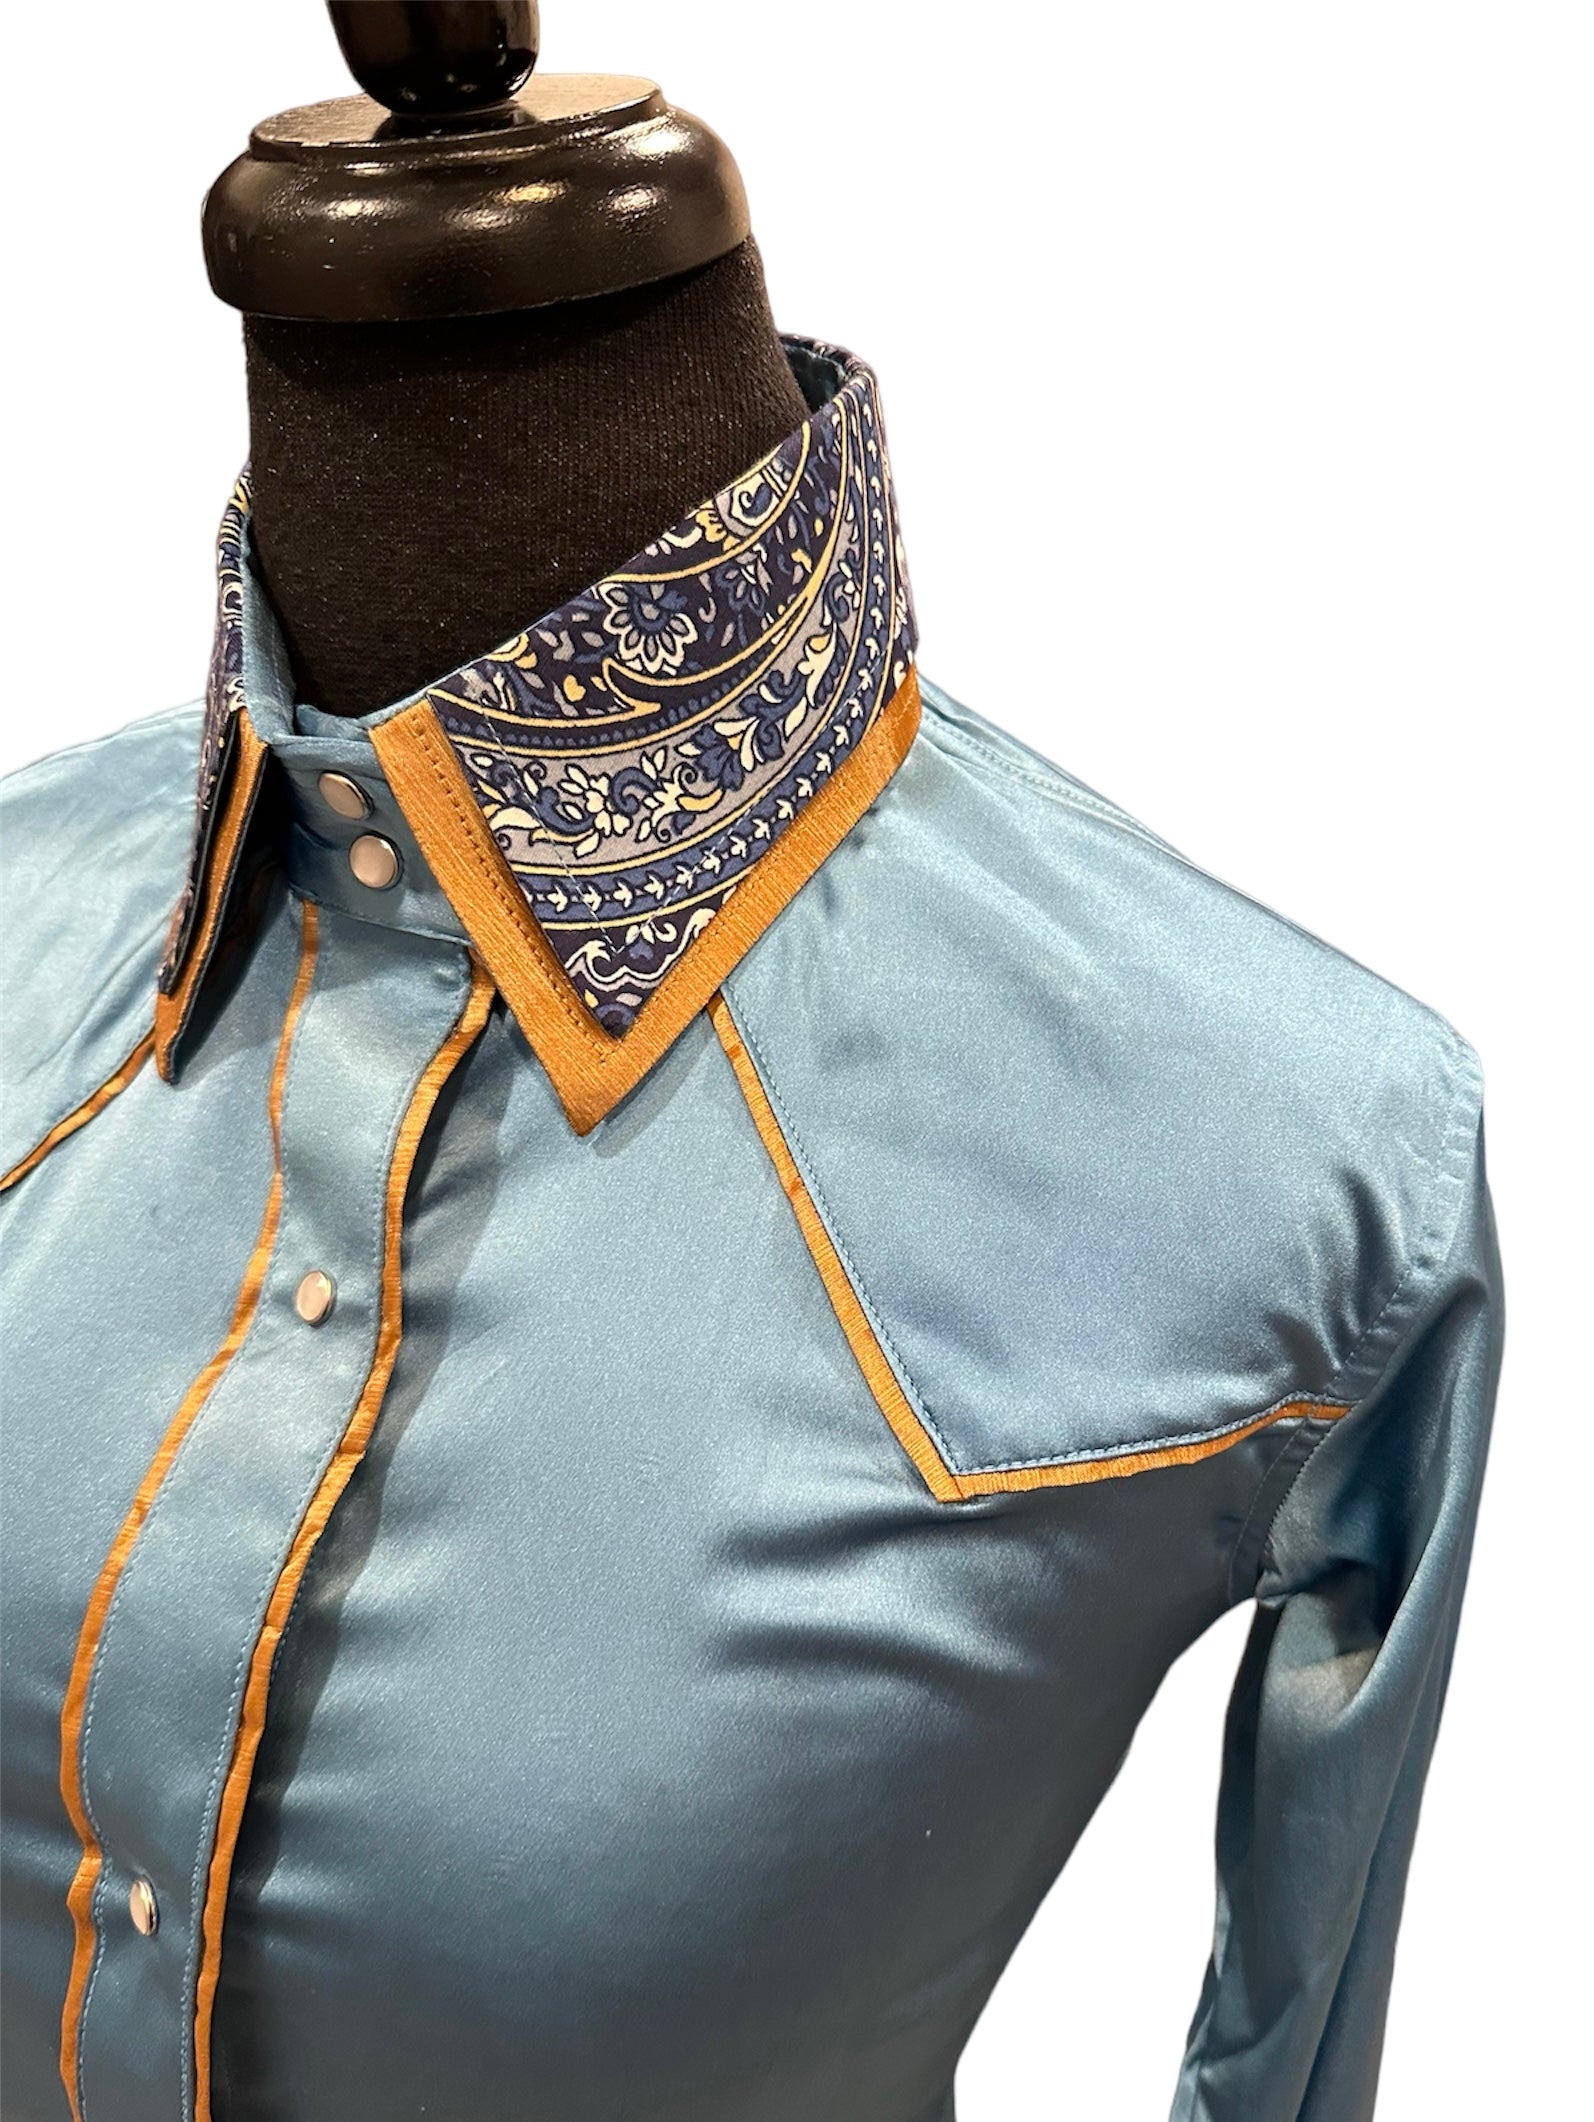 Stretch Satin Western Shirt Light blue with Navy and Gold Accents